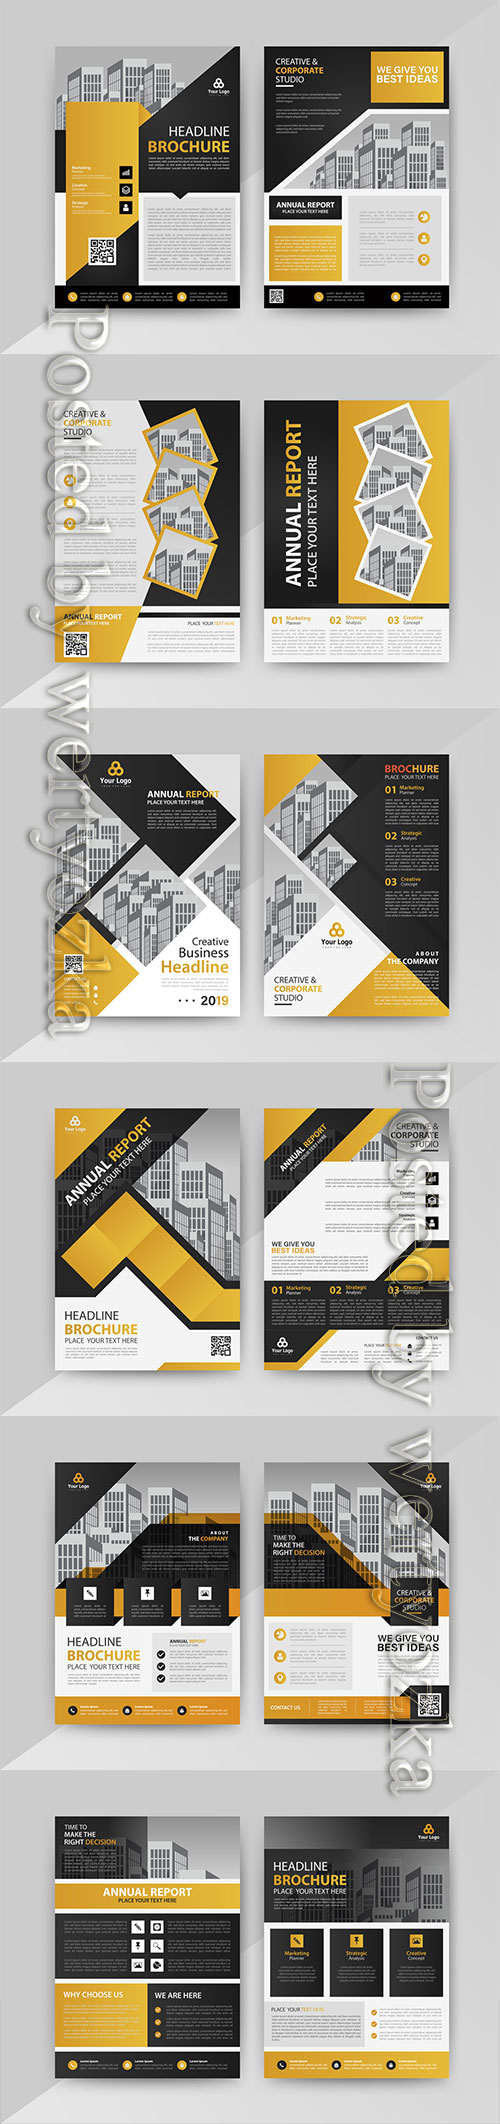 Business vector template for brochure, annual report, magazine # 11